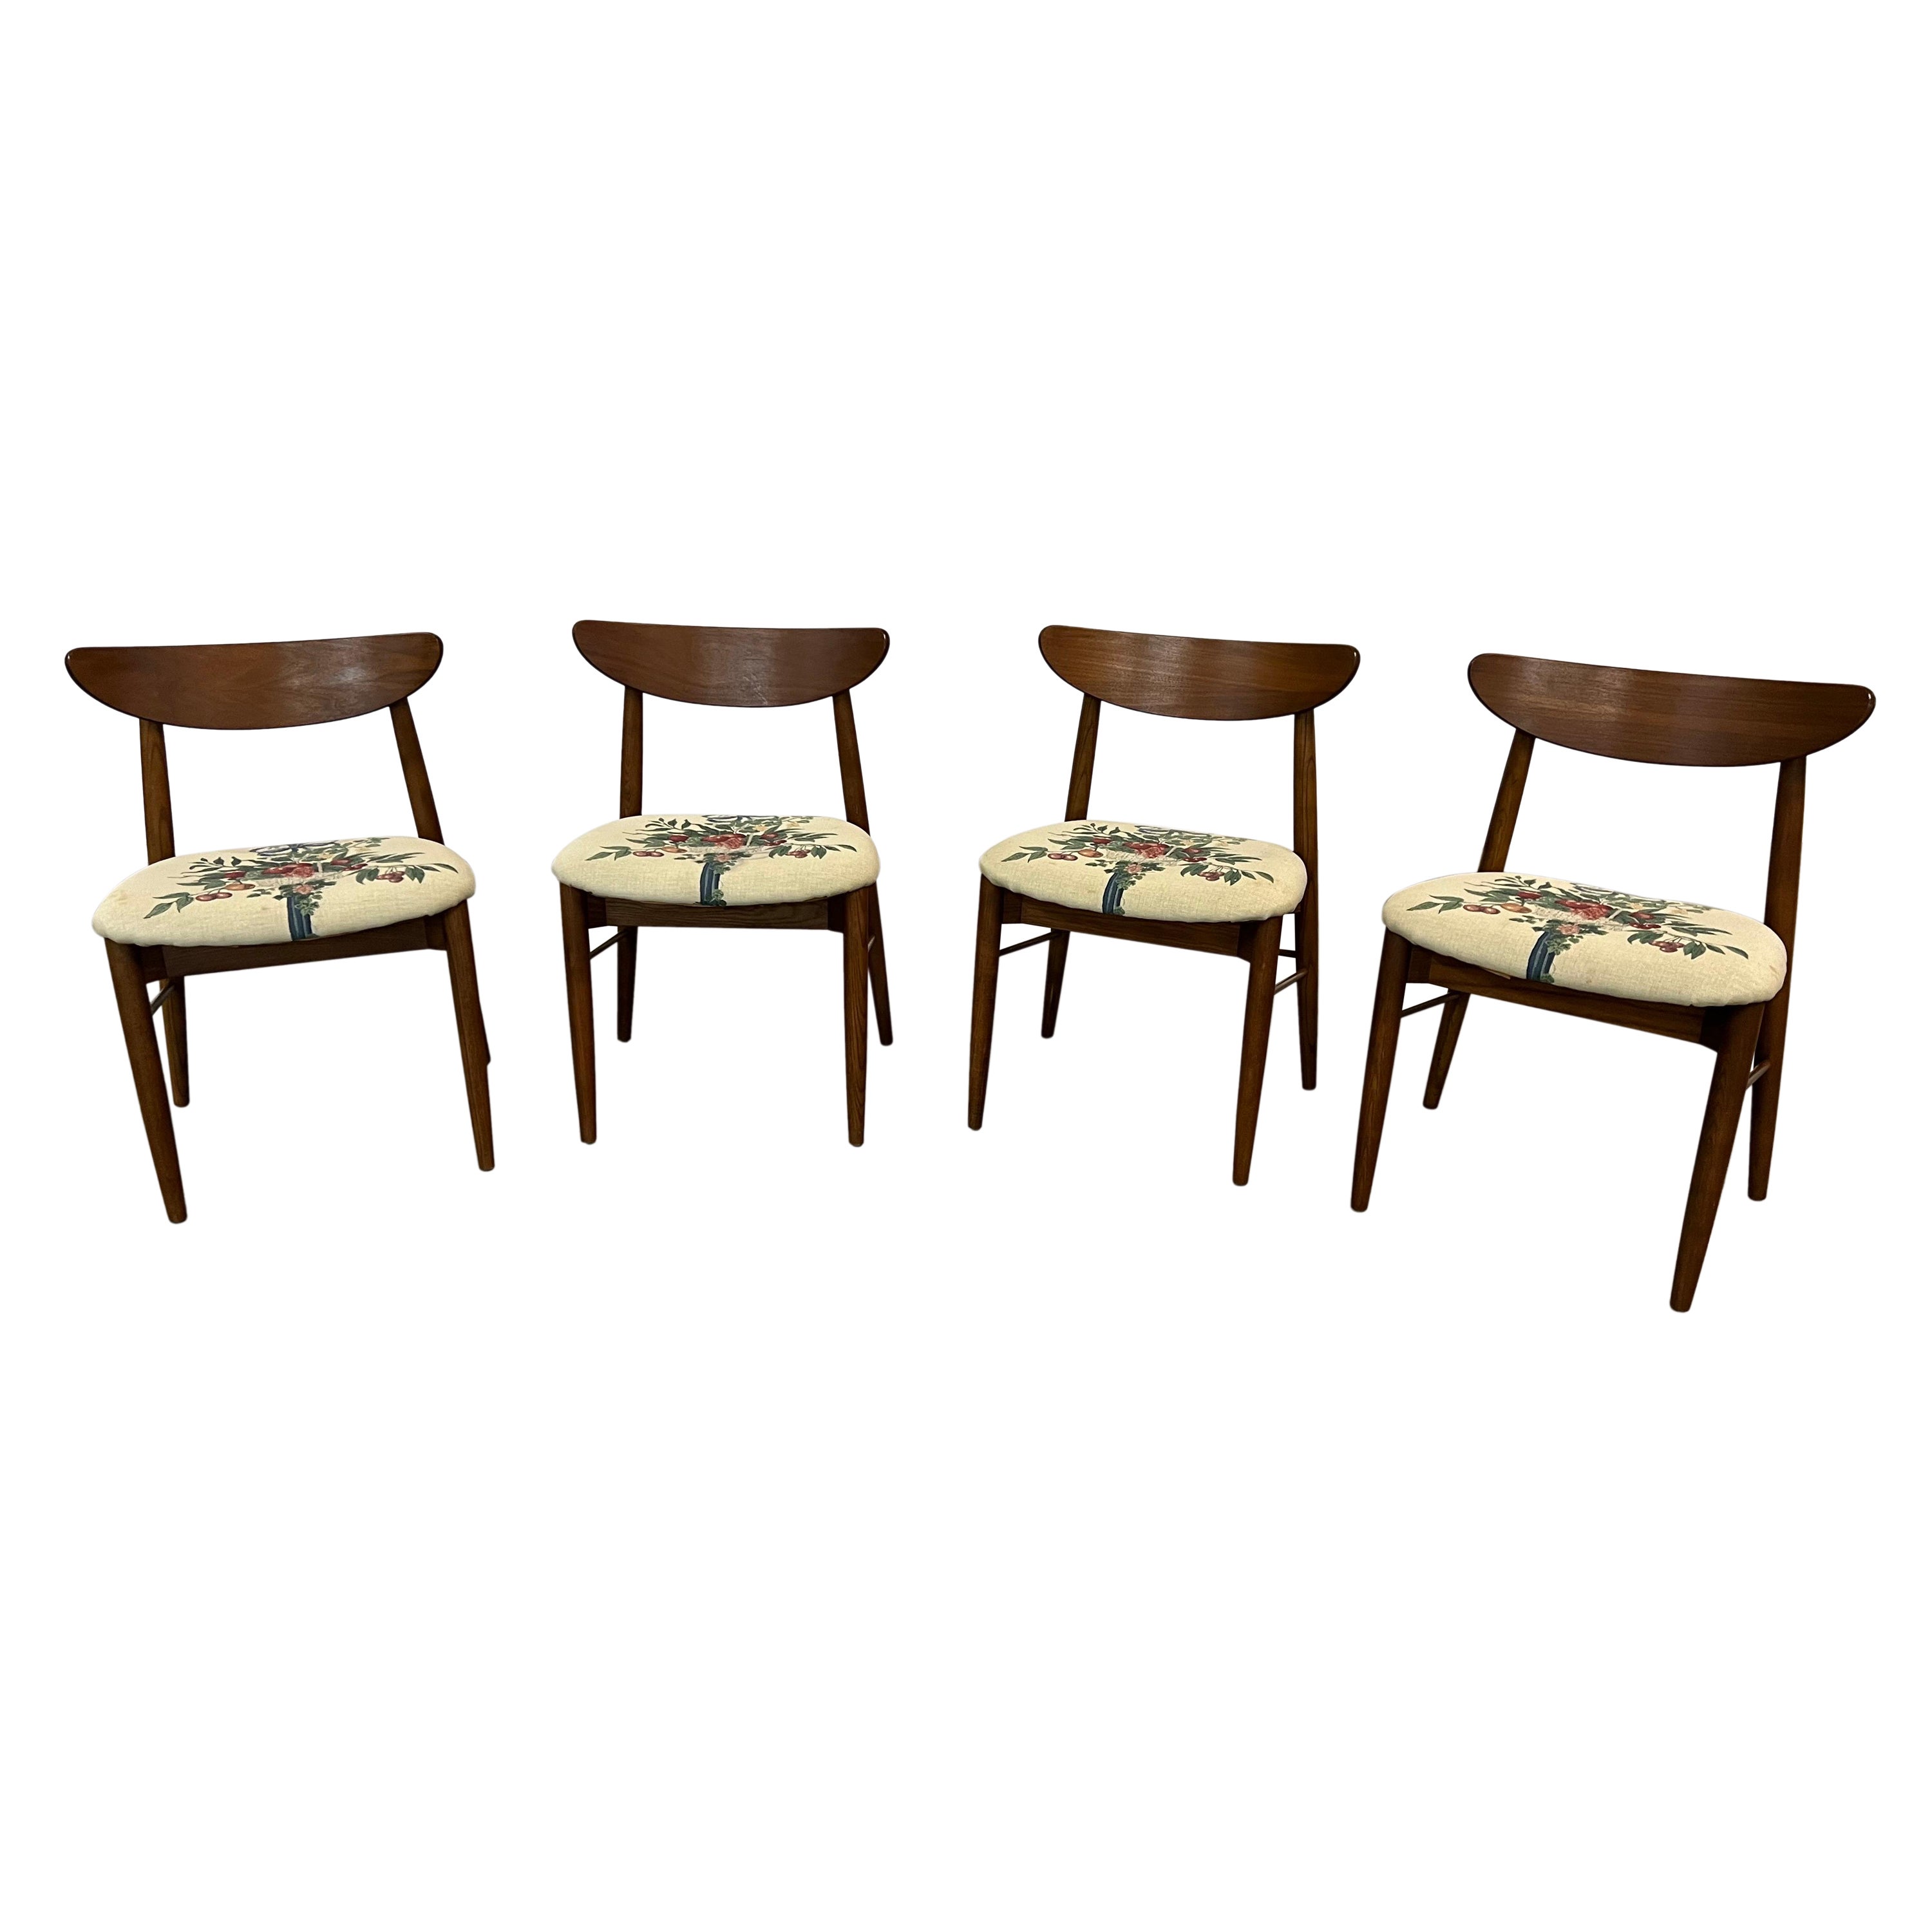  Set of 4 Mid-Century Modern H Paul Browning Shell Back Dining Chairs For Sale